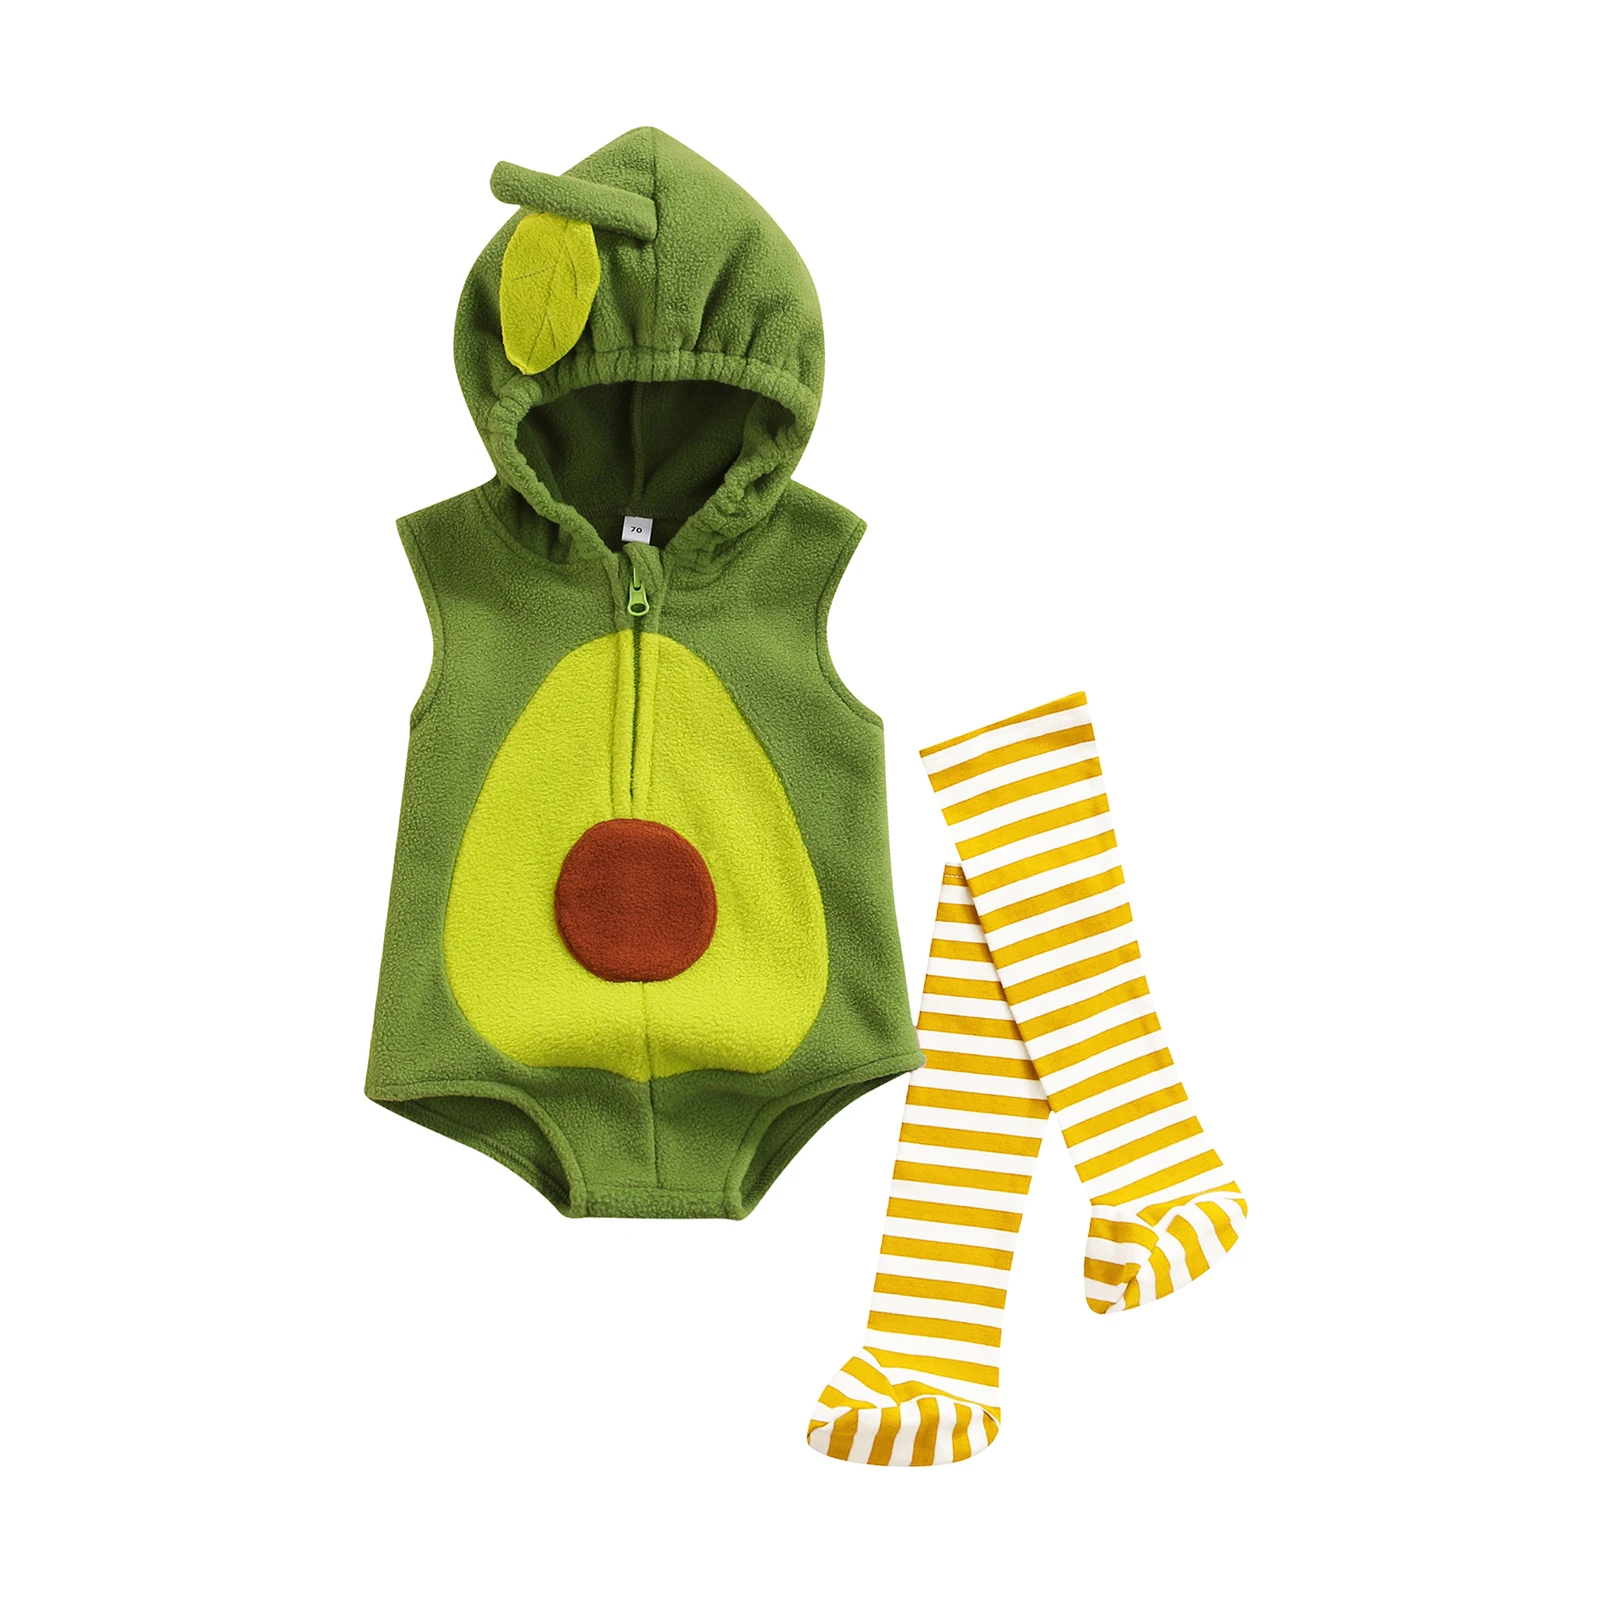 Cute Infant Baby Girls Romper Ma&Baby 0-24M Newborn Infant Baby Girls Boys Romper Cute Avocado Jumpsuit Sleeveless Soft Baby Clothing Birthday Party Costume baby clothes cheap